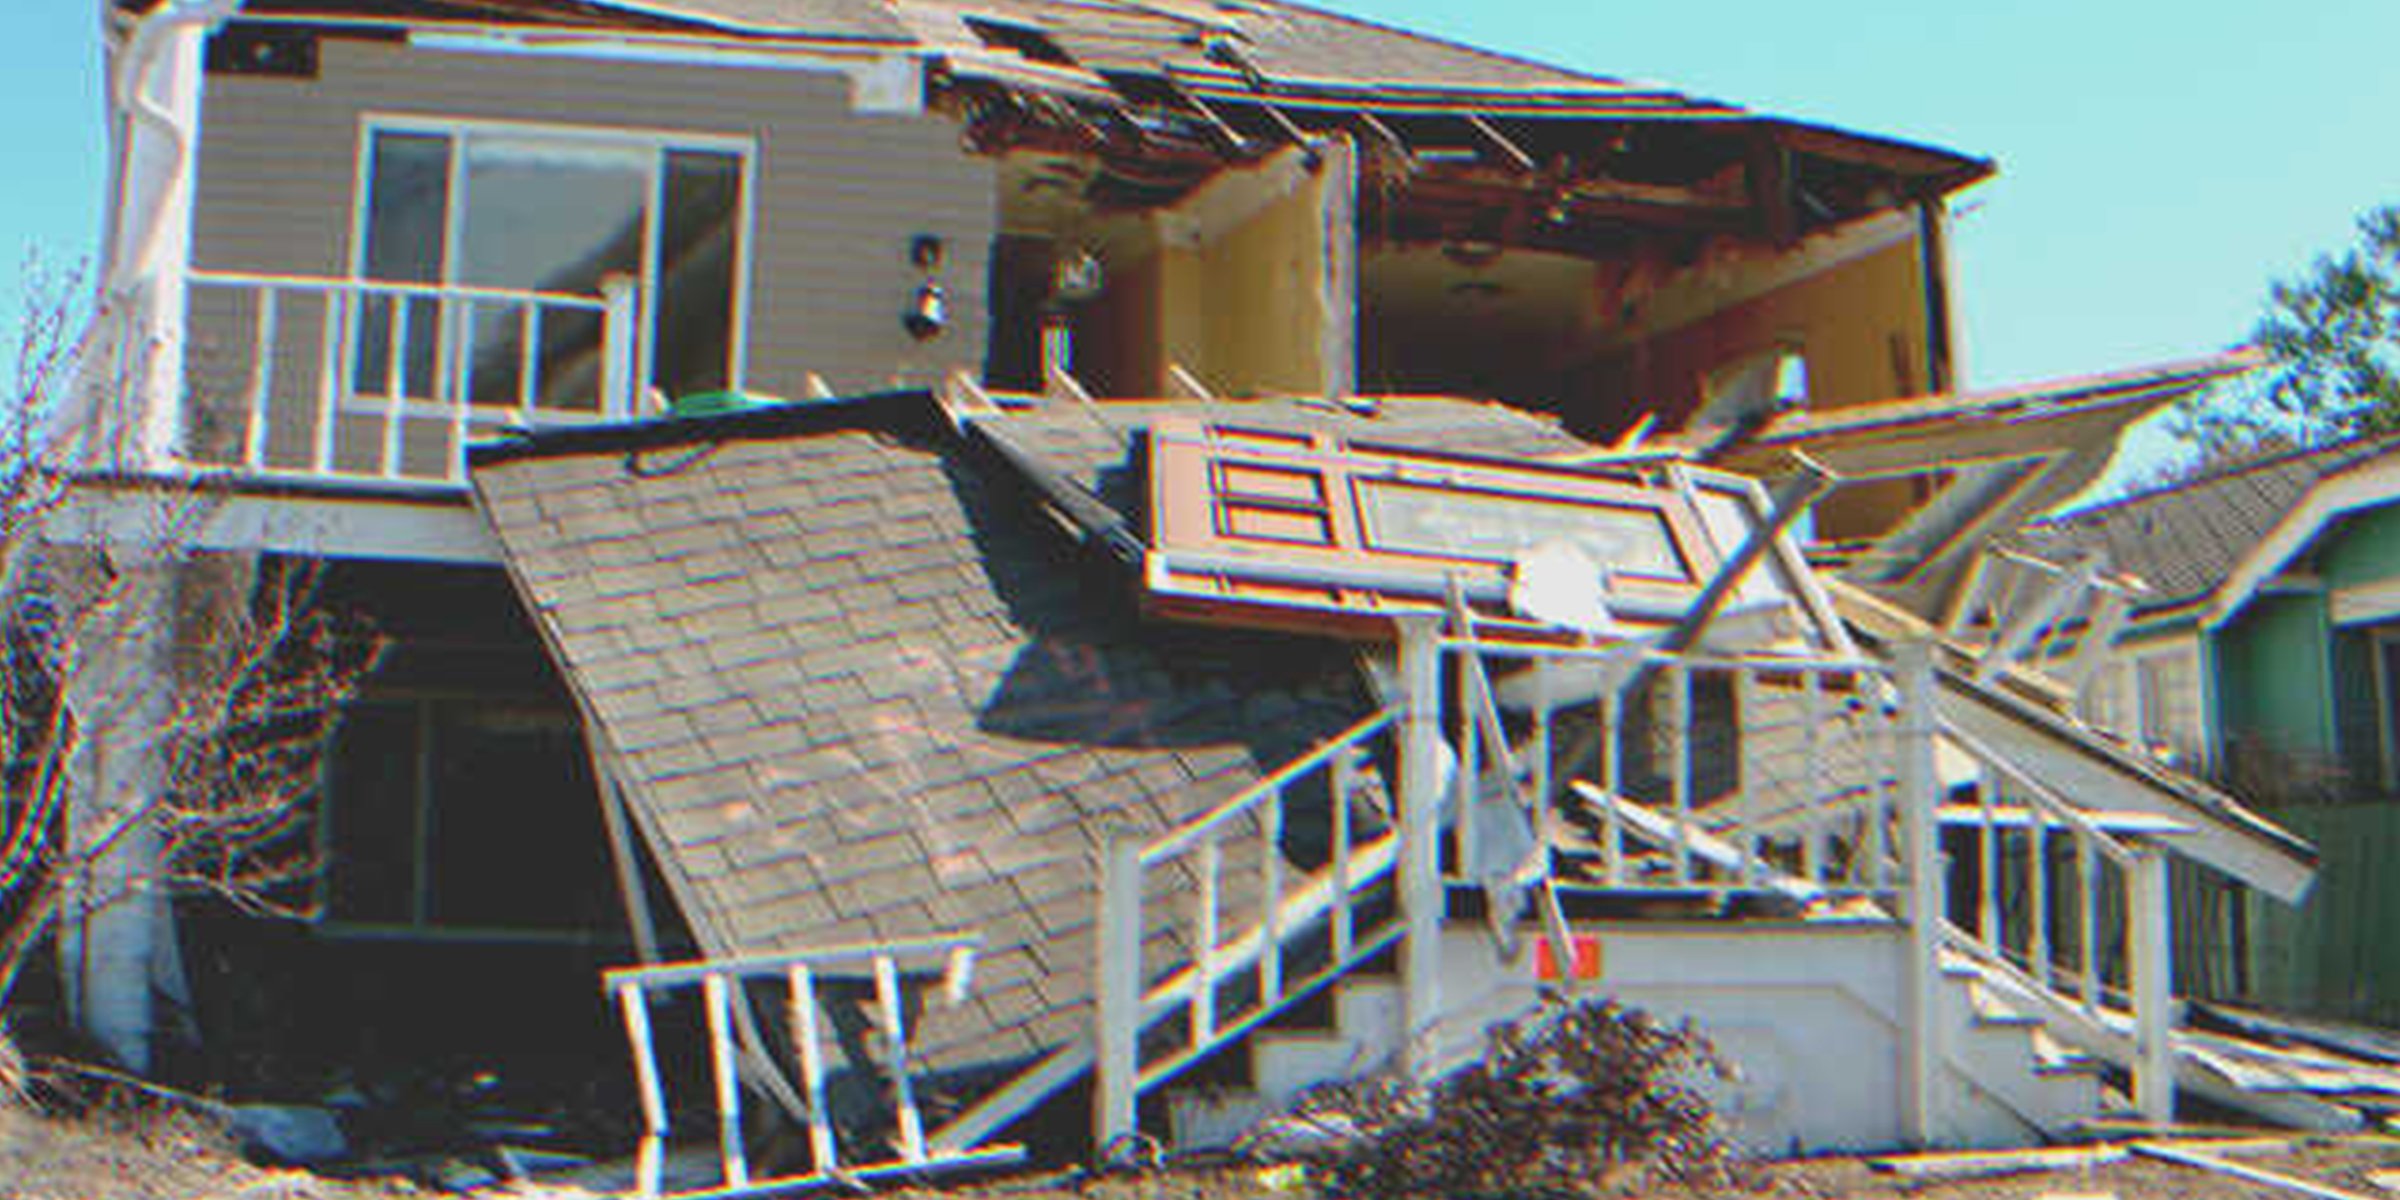 Holly's house was destroyed in the tornado and it would take a long time to fix it.  |  Source: Getty Images